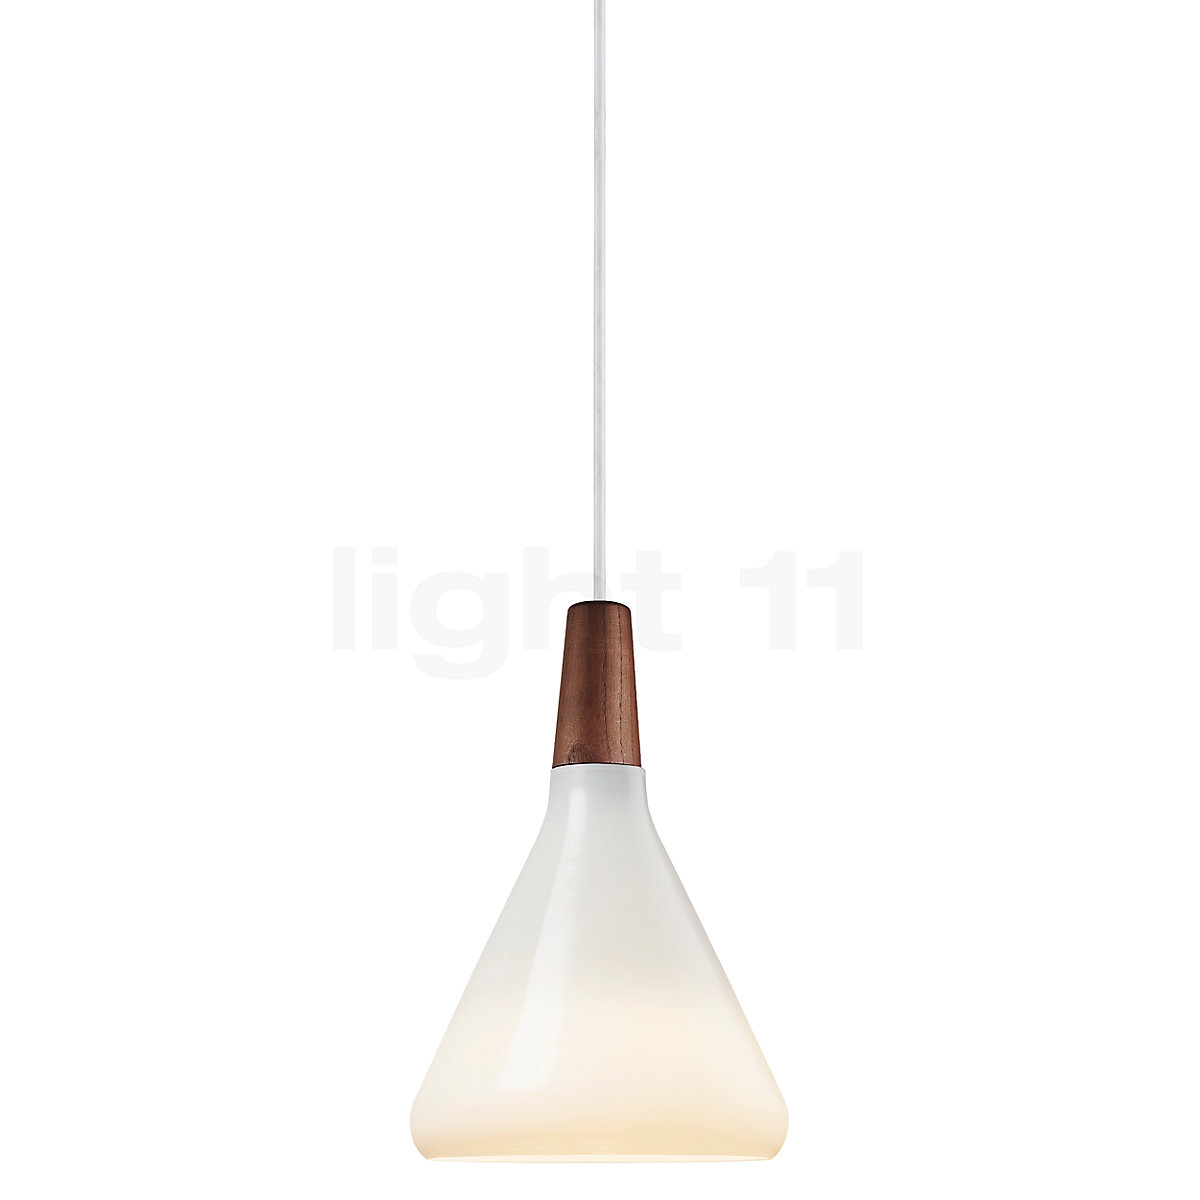 Pendant the Light Nori for People at Buy Design